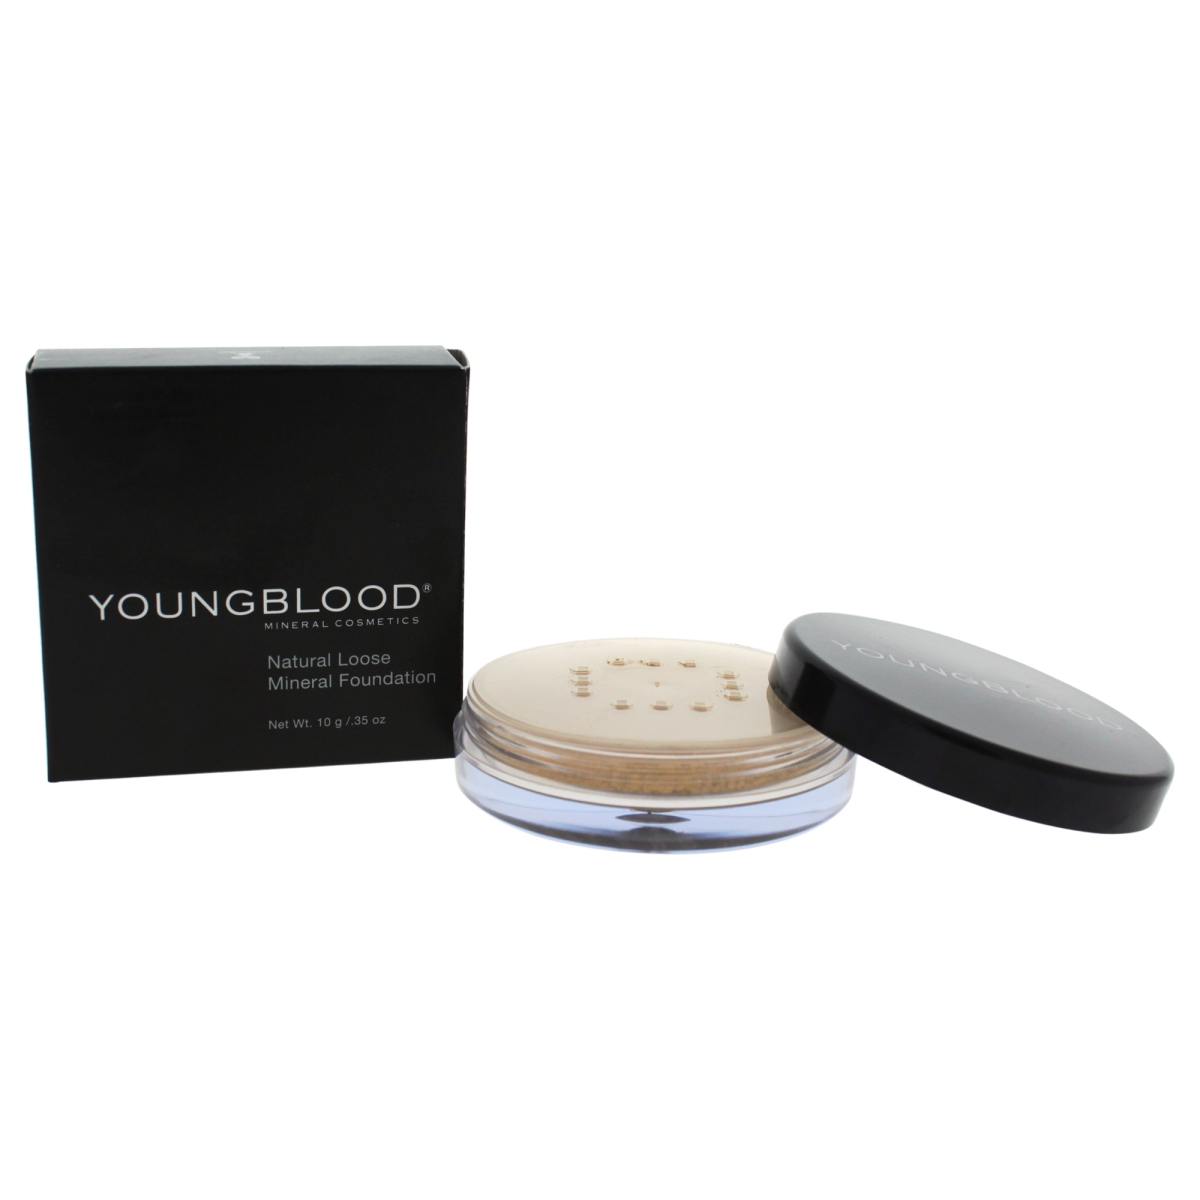 Picture of Youngblood W-C-11946 Natural Loose Mineral Foundation - Warm Beige for Women - 0.35 oz